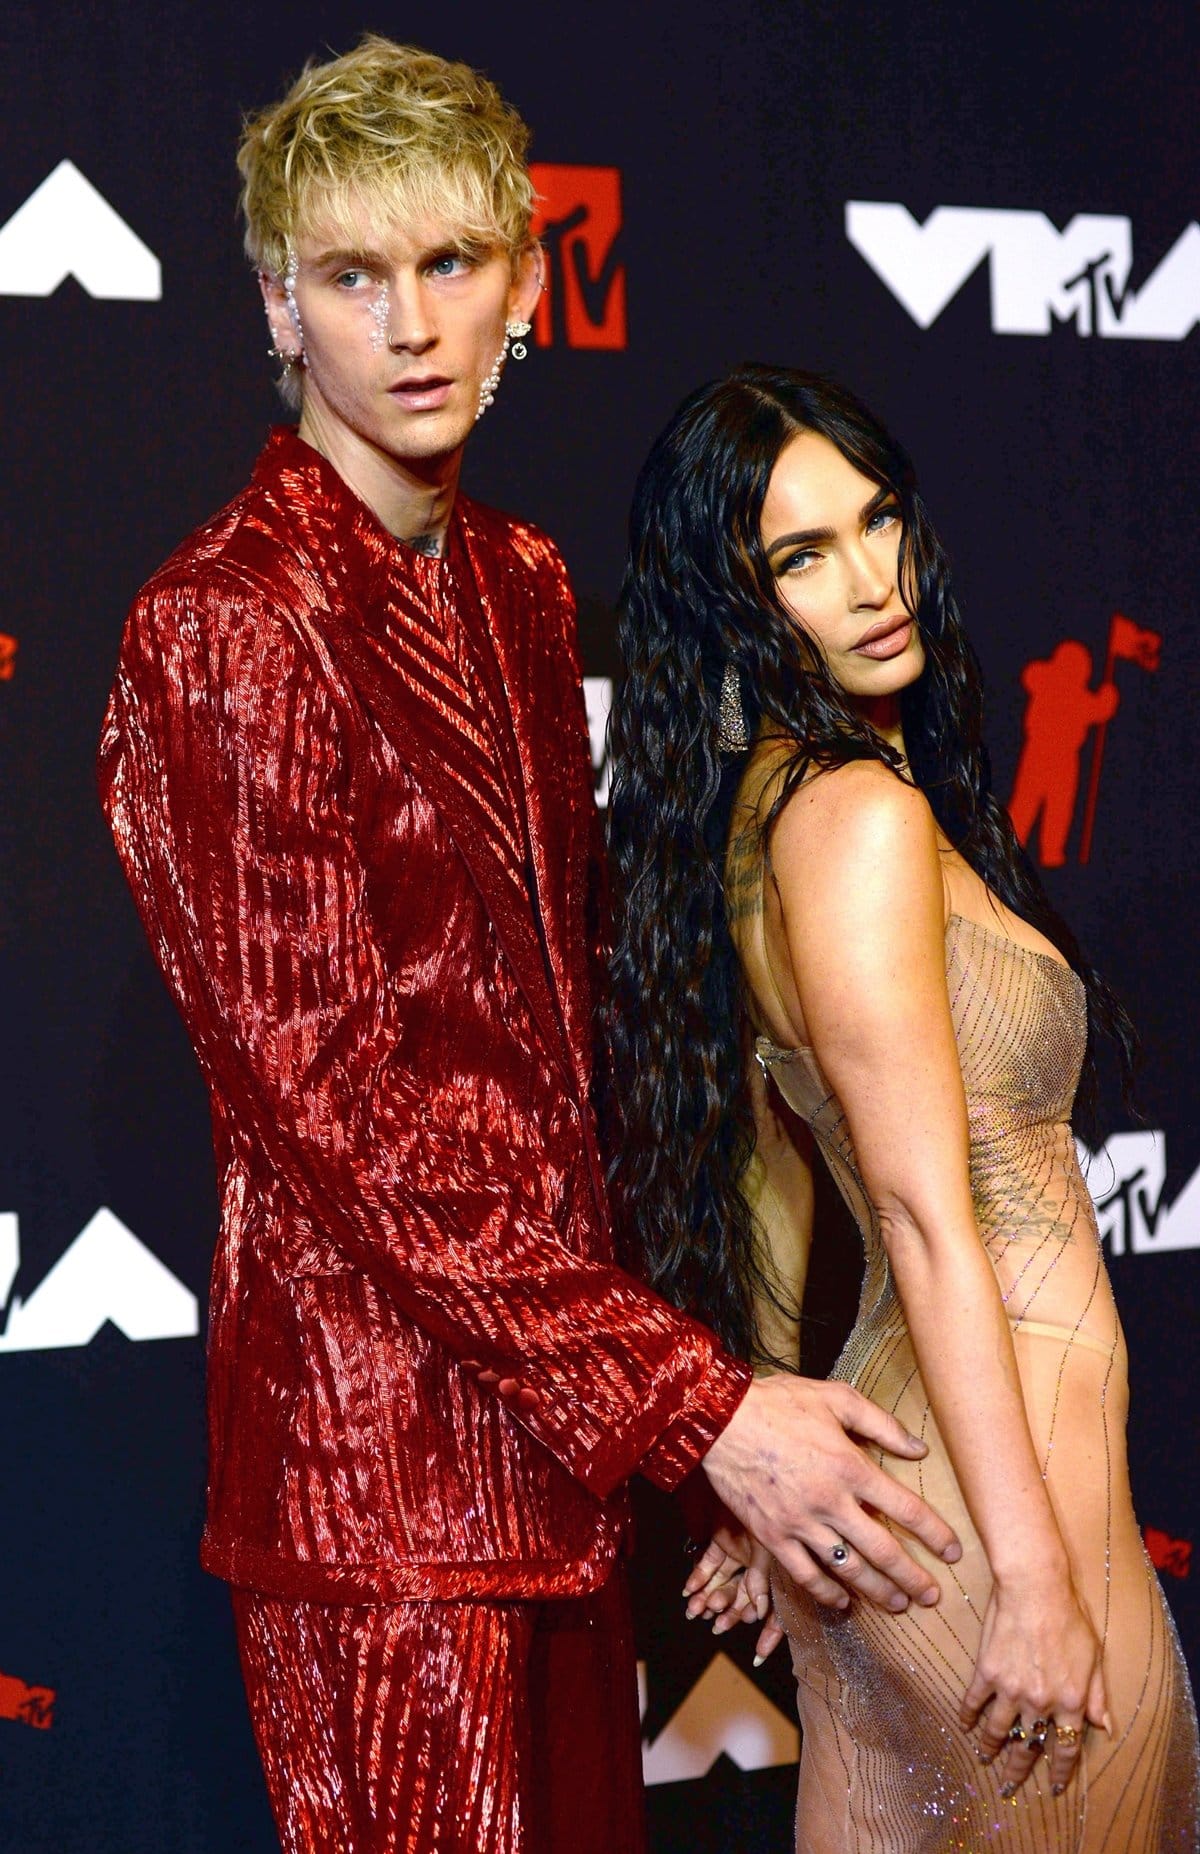 Megan Fox and Machine Gun Kelly began dating in May 2020 and announced their engagement in January 2022